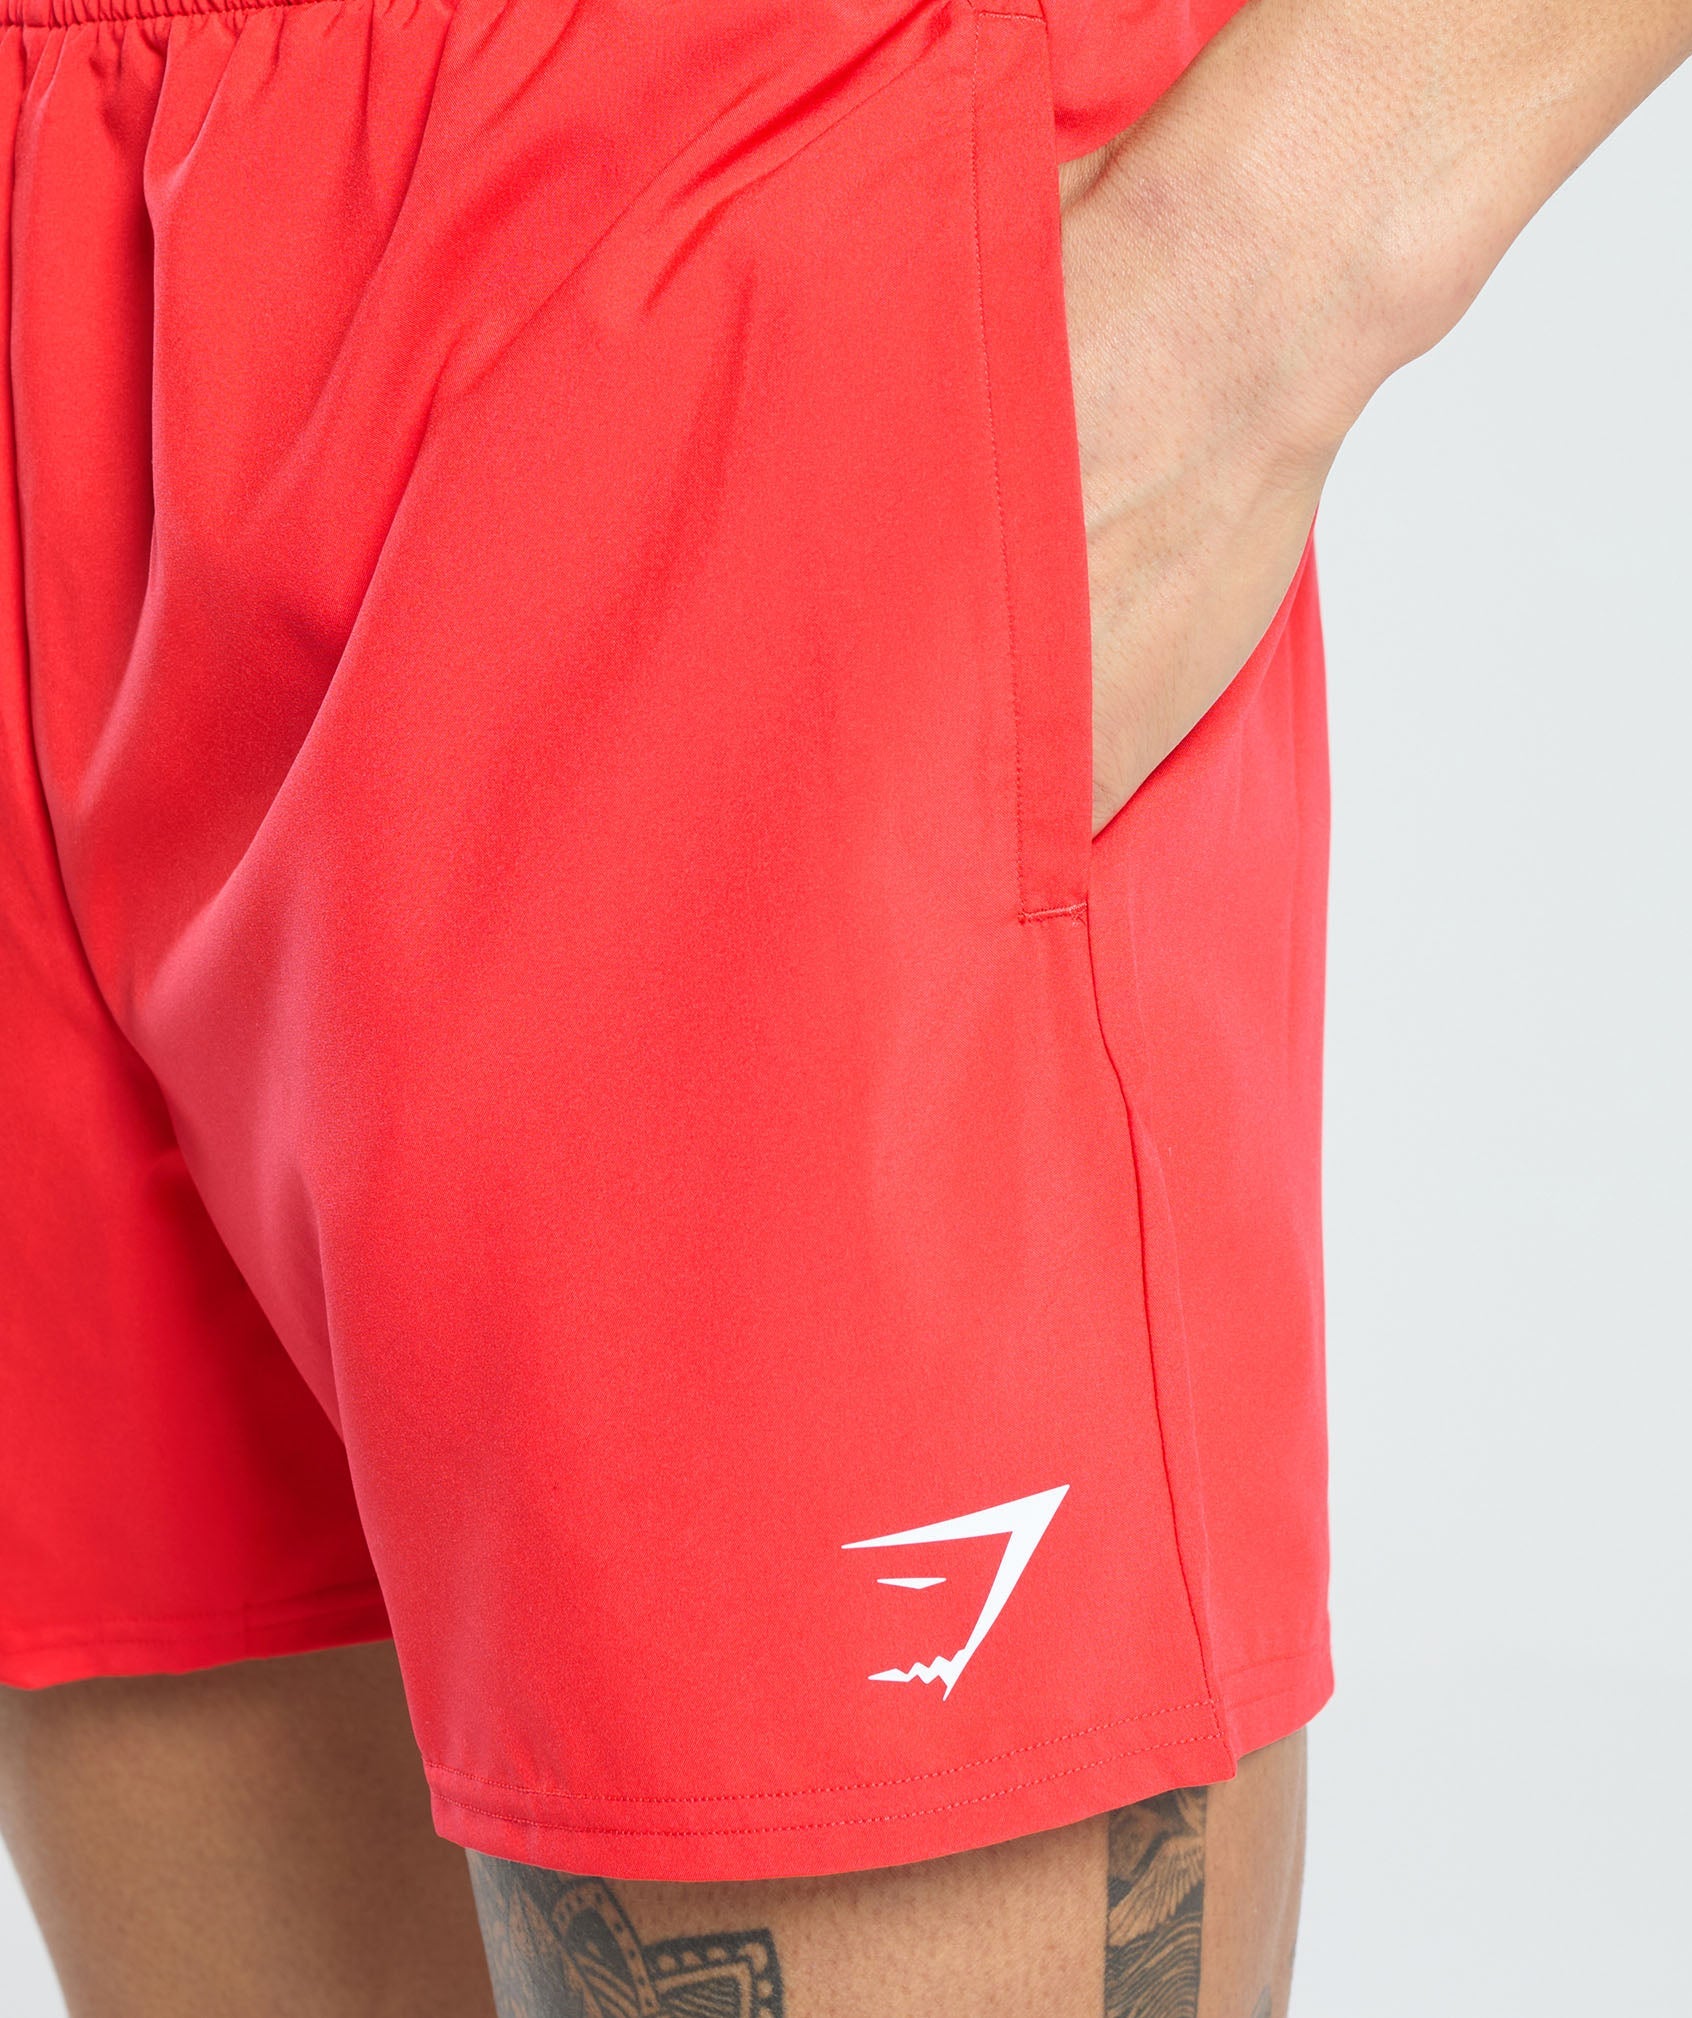 Arrival 5" Shorts in Pow Red - view 6